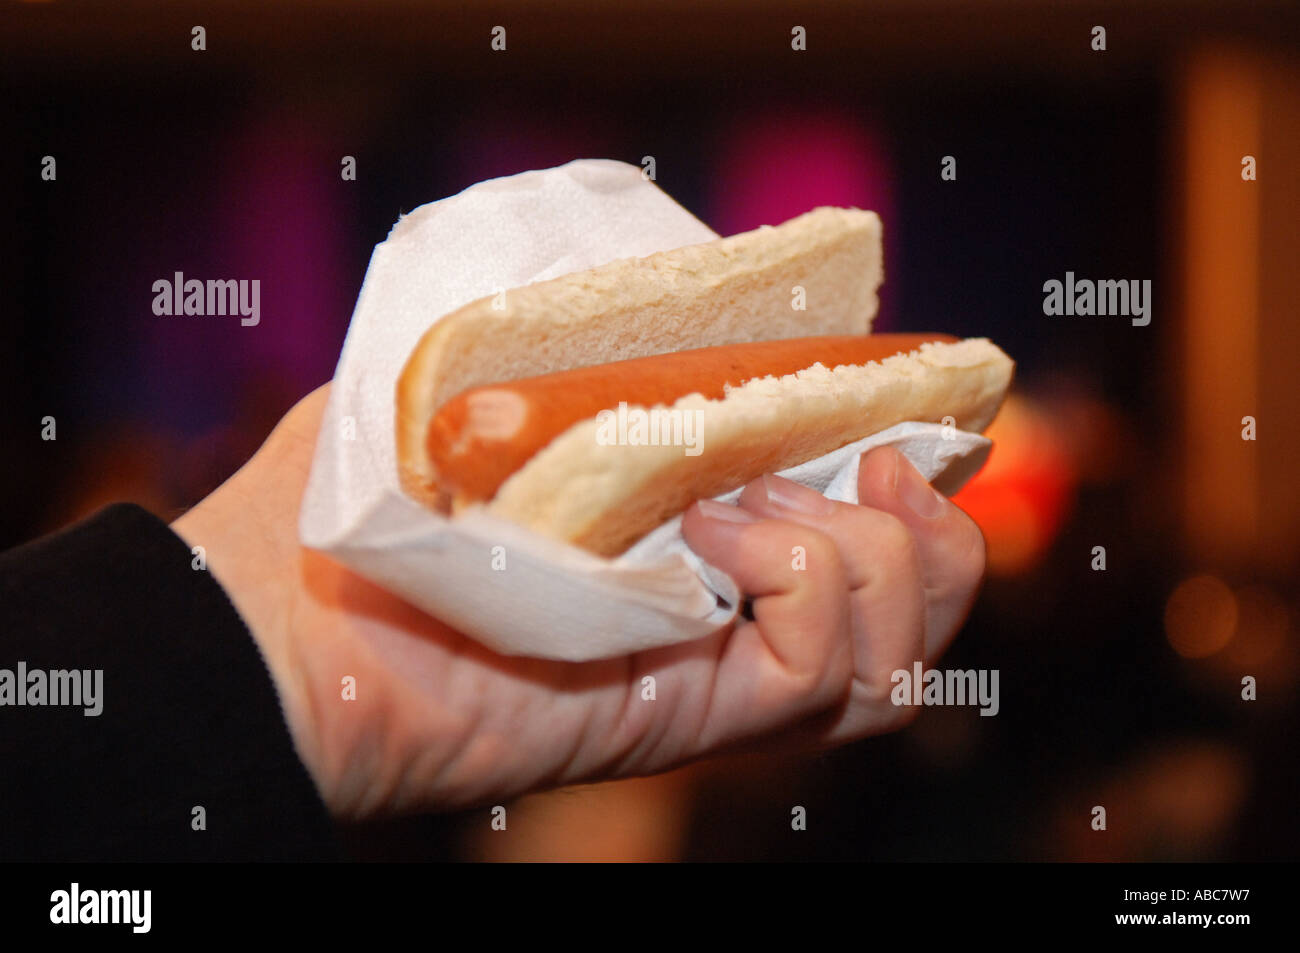 Hand holding a hot dog Stock Photo